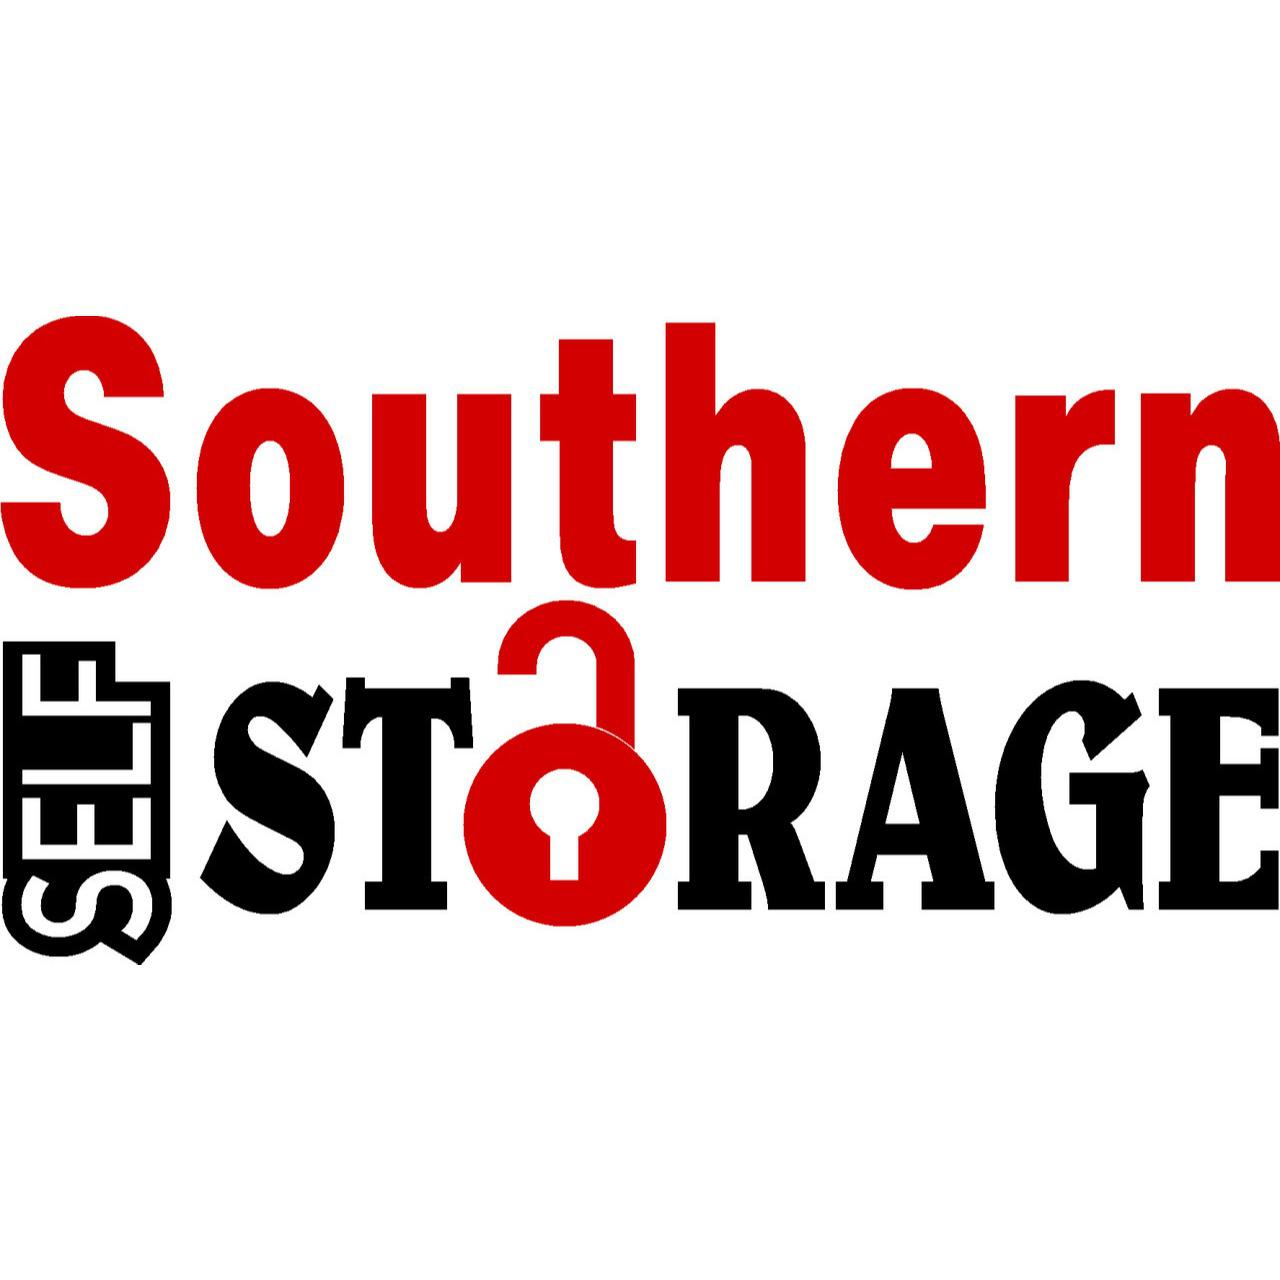 Southern Storage of Monroeville - Monroeville, AL 36460 - (251)943-6464 | ShowMeLocal.com